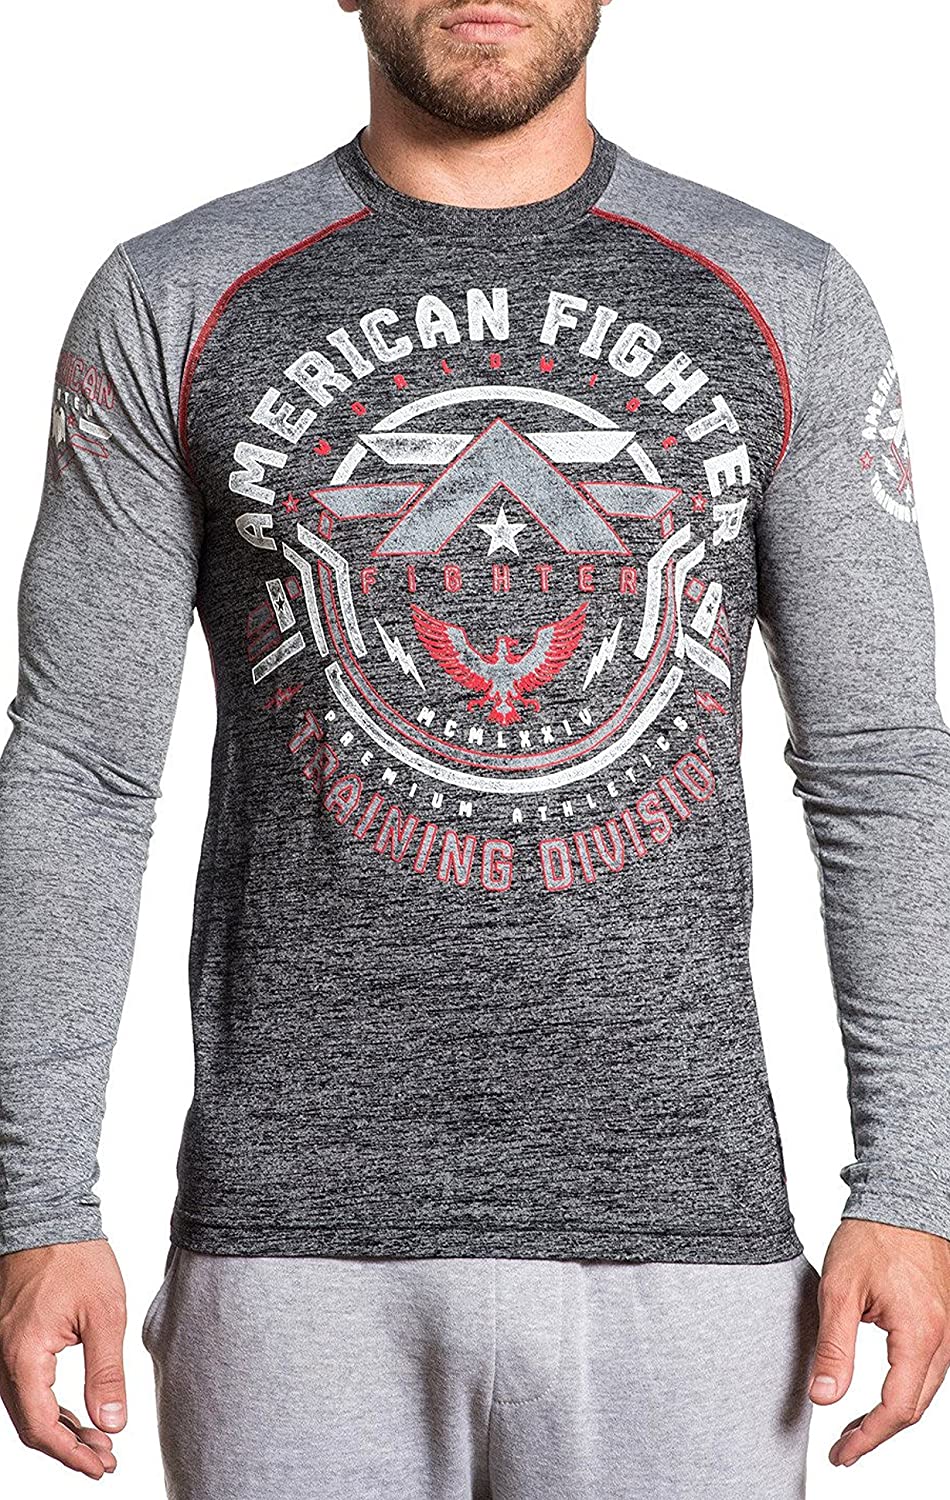 American Fighter Catalina Graphic Long Sleeve T-Shirt for Men by Affliction, Grey, 4X